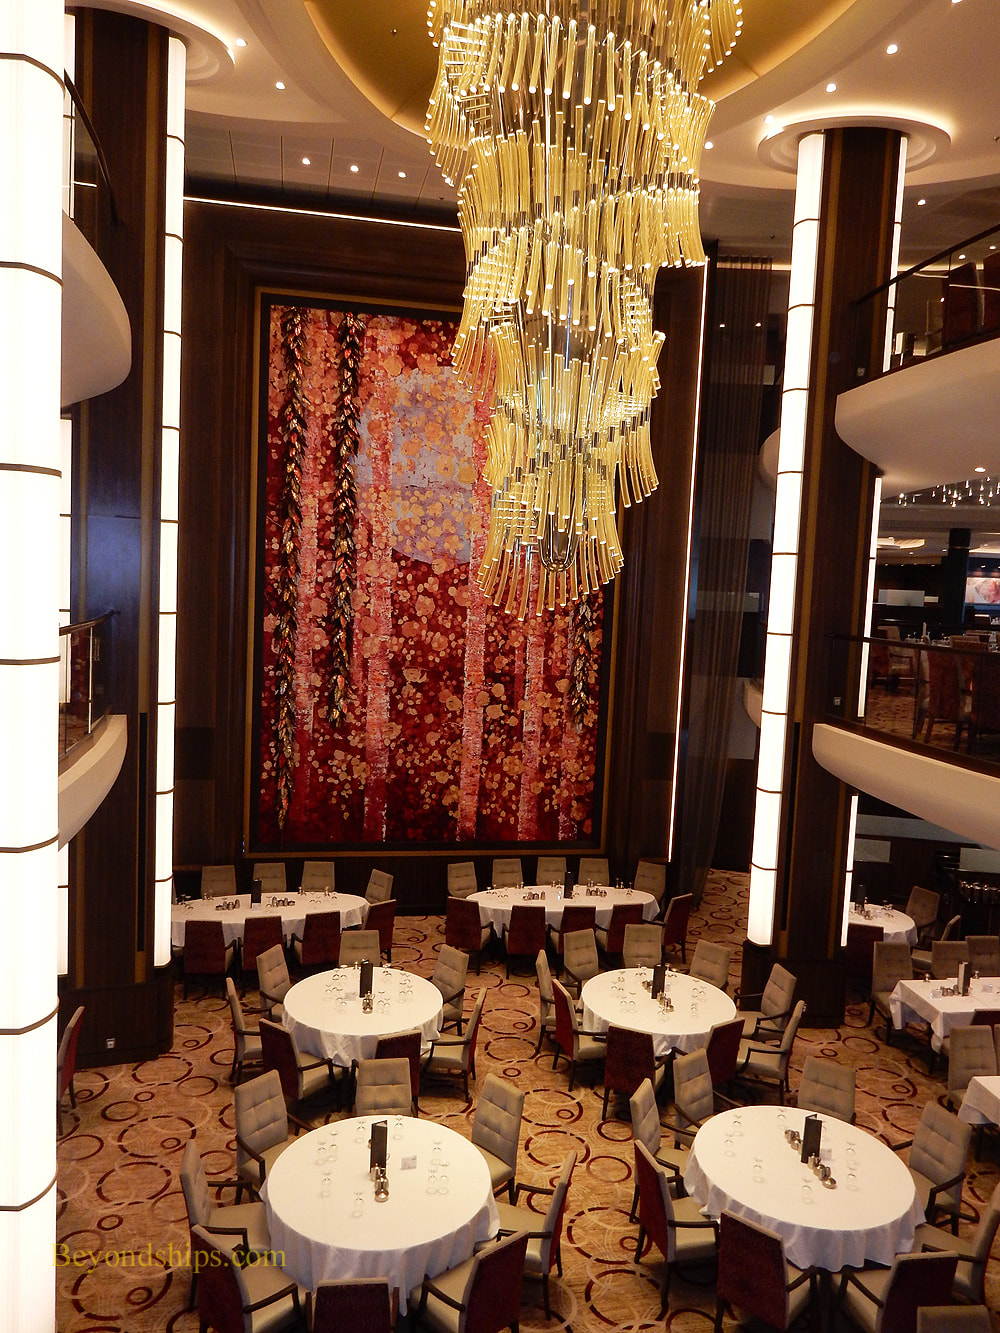 Symphony of the Seas, dining room